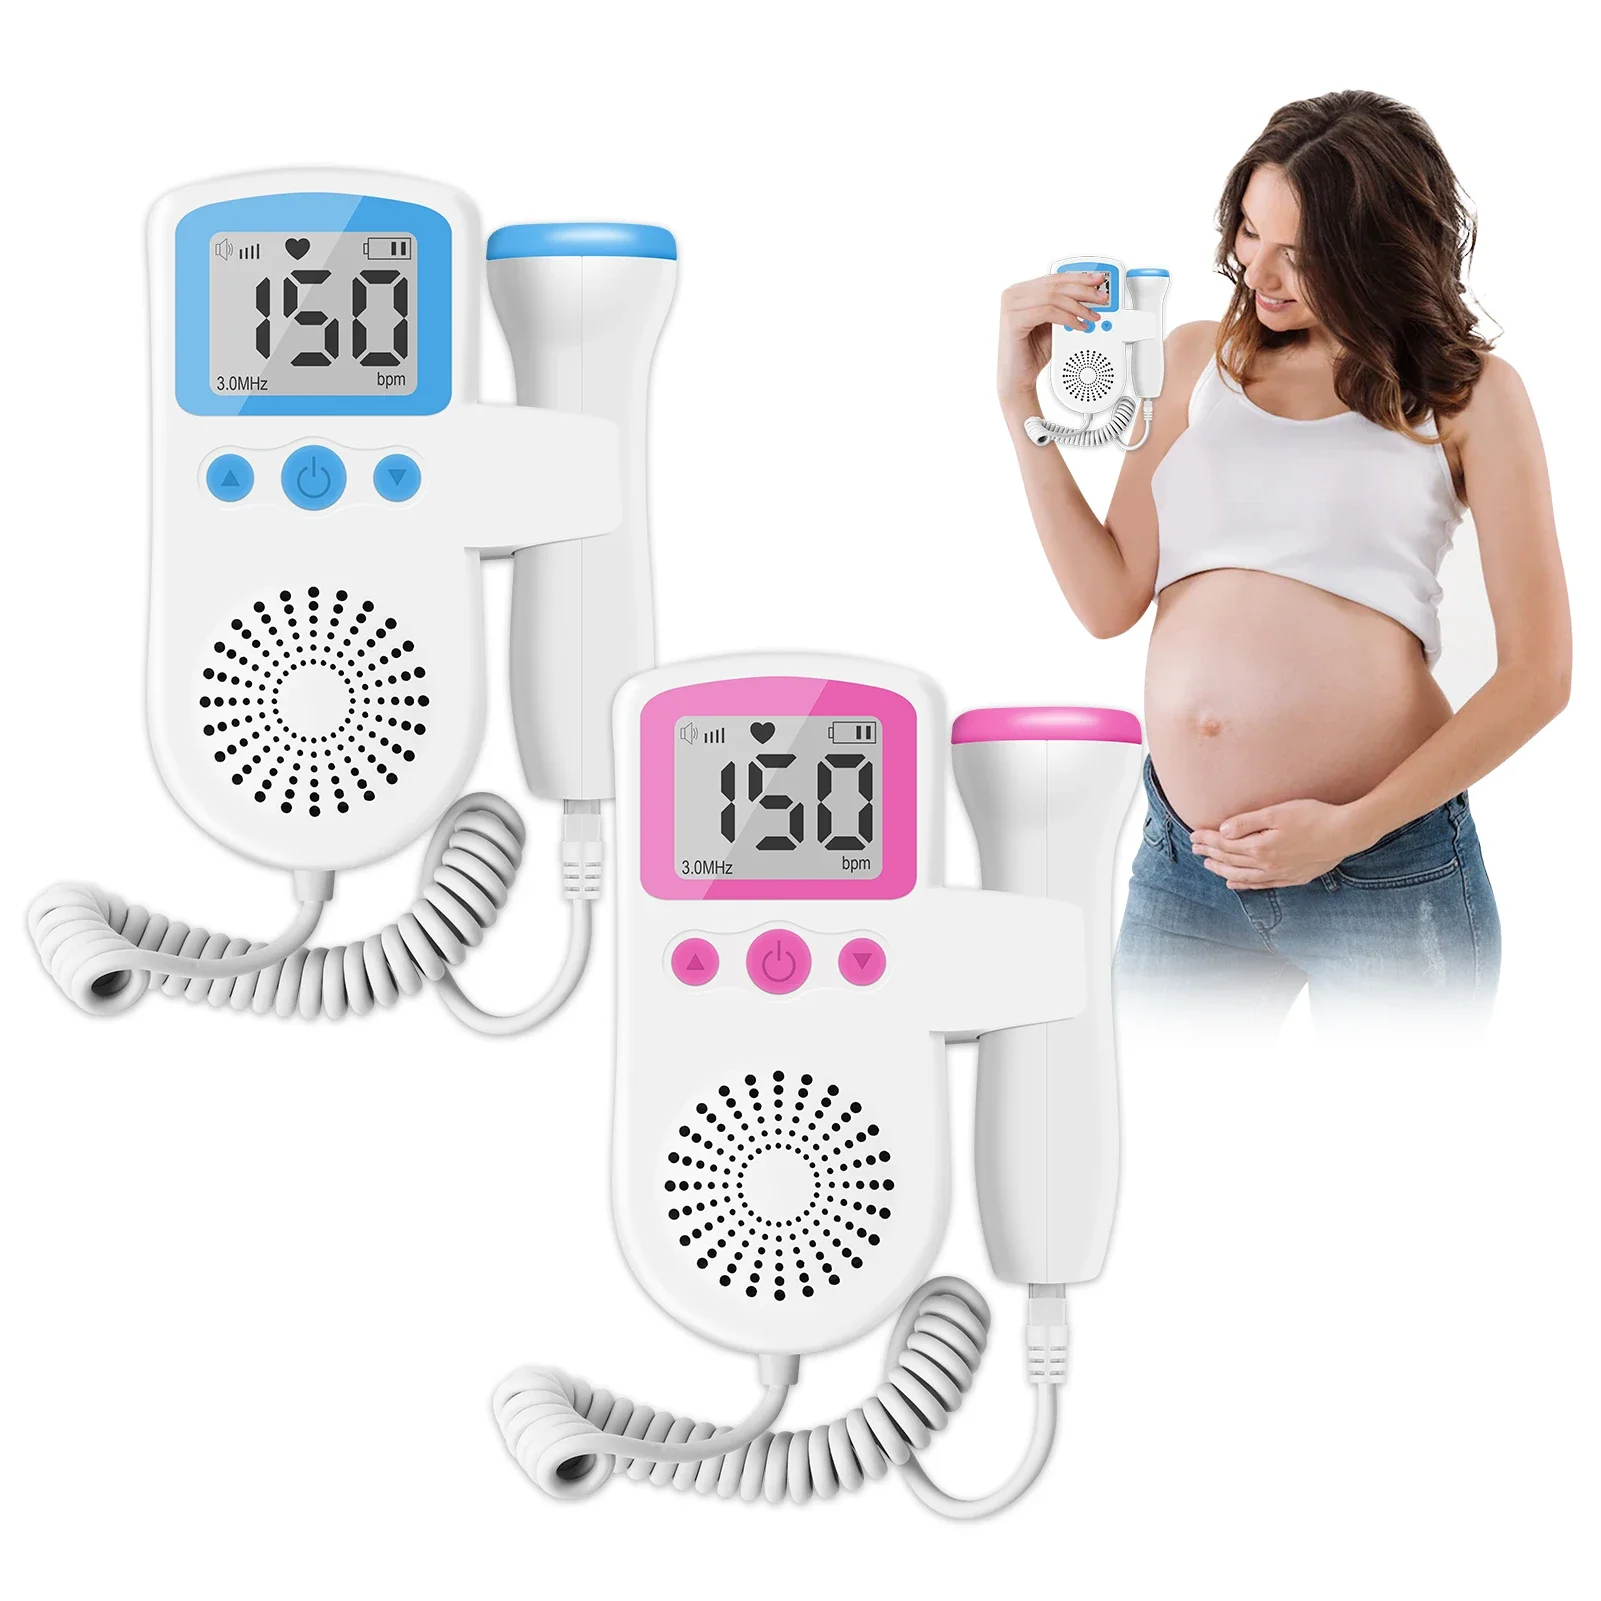 Fetal Doppler Portable LCD Display No Radiation 3.0MH Heart Rate Monitor Sonar Meter For Home Pregnancy Baby Sound B Detector